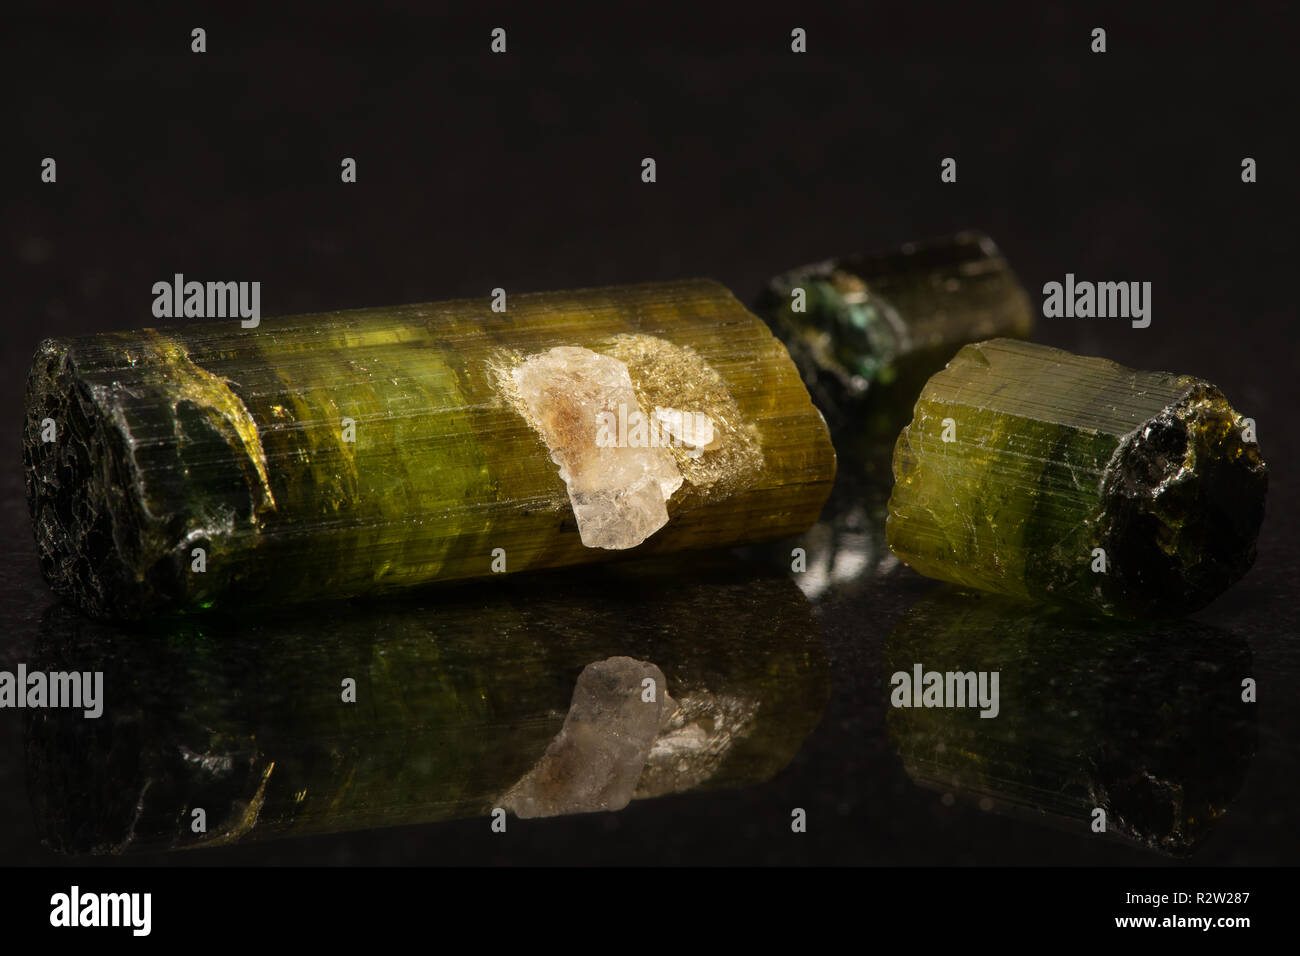 Several tourmaline crystals on a dark reflective background. Stock Photo